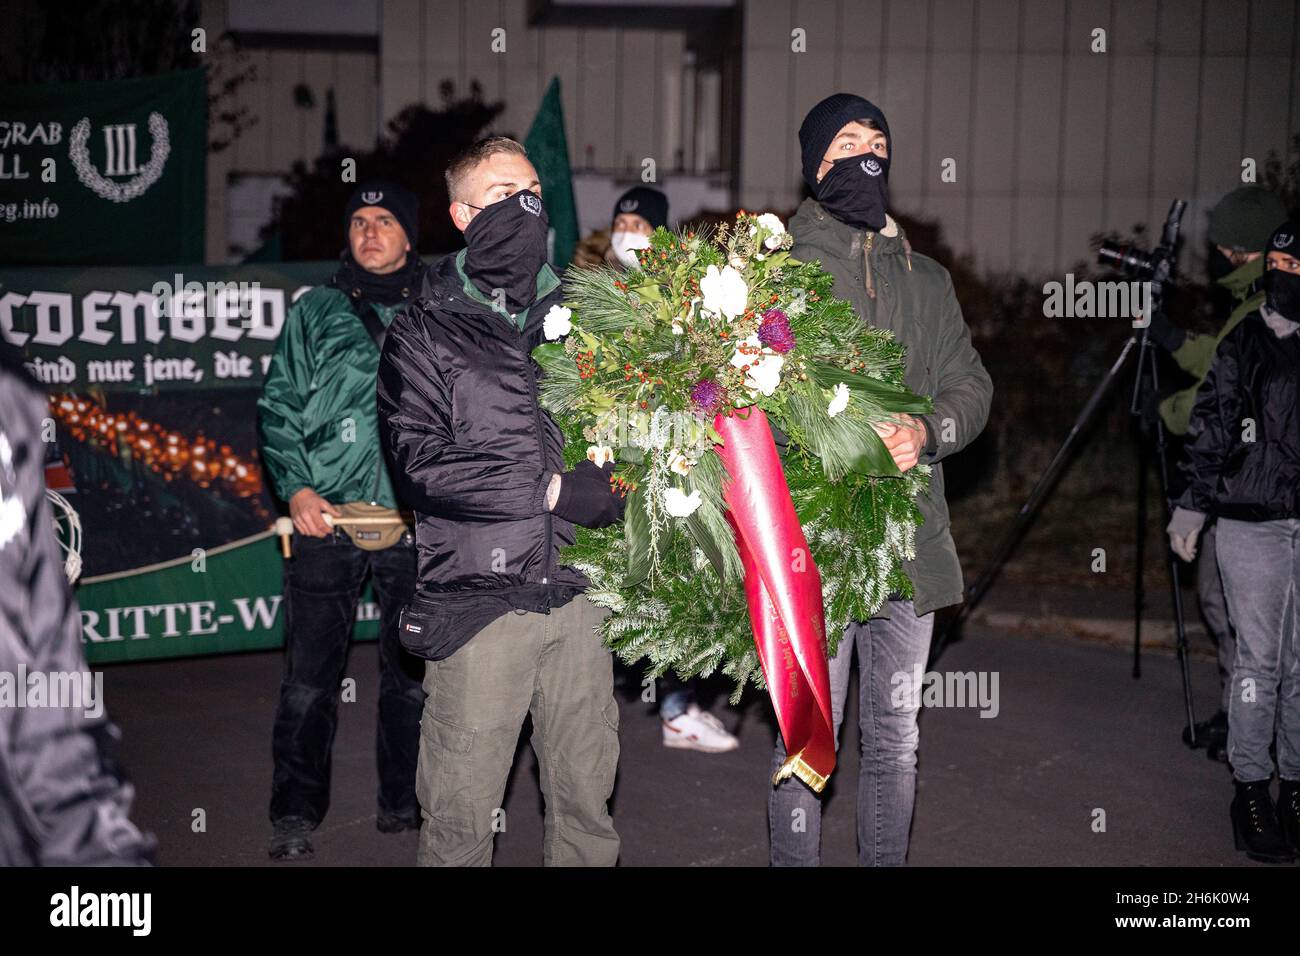 Wunsiedel, Deutschland. 13th Nov, 2021. On November 13, 2021 a torch march of neo-nazis of the III. Weg (third way) took place in Wunsiedel, Upper Franconia, Germany. The far-right protest was accompanied by 450 counter protestors of the initiative NichtLangFackeln. Wunsiedel is the place where Adolf Hitler's deputy Rudolf Hess was buried until 2011. (Photo by Alexander Pohl/Sipa USA) Credit: Sipa USA/Alamy Live News Stock Photo